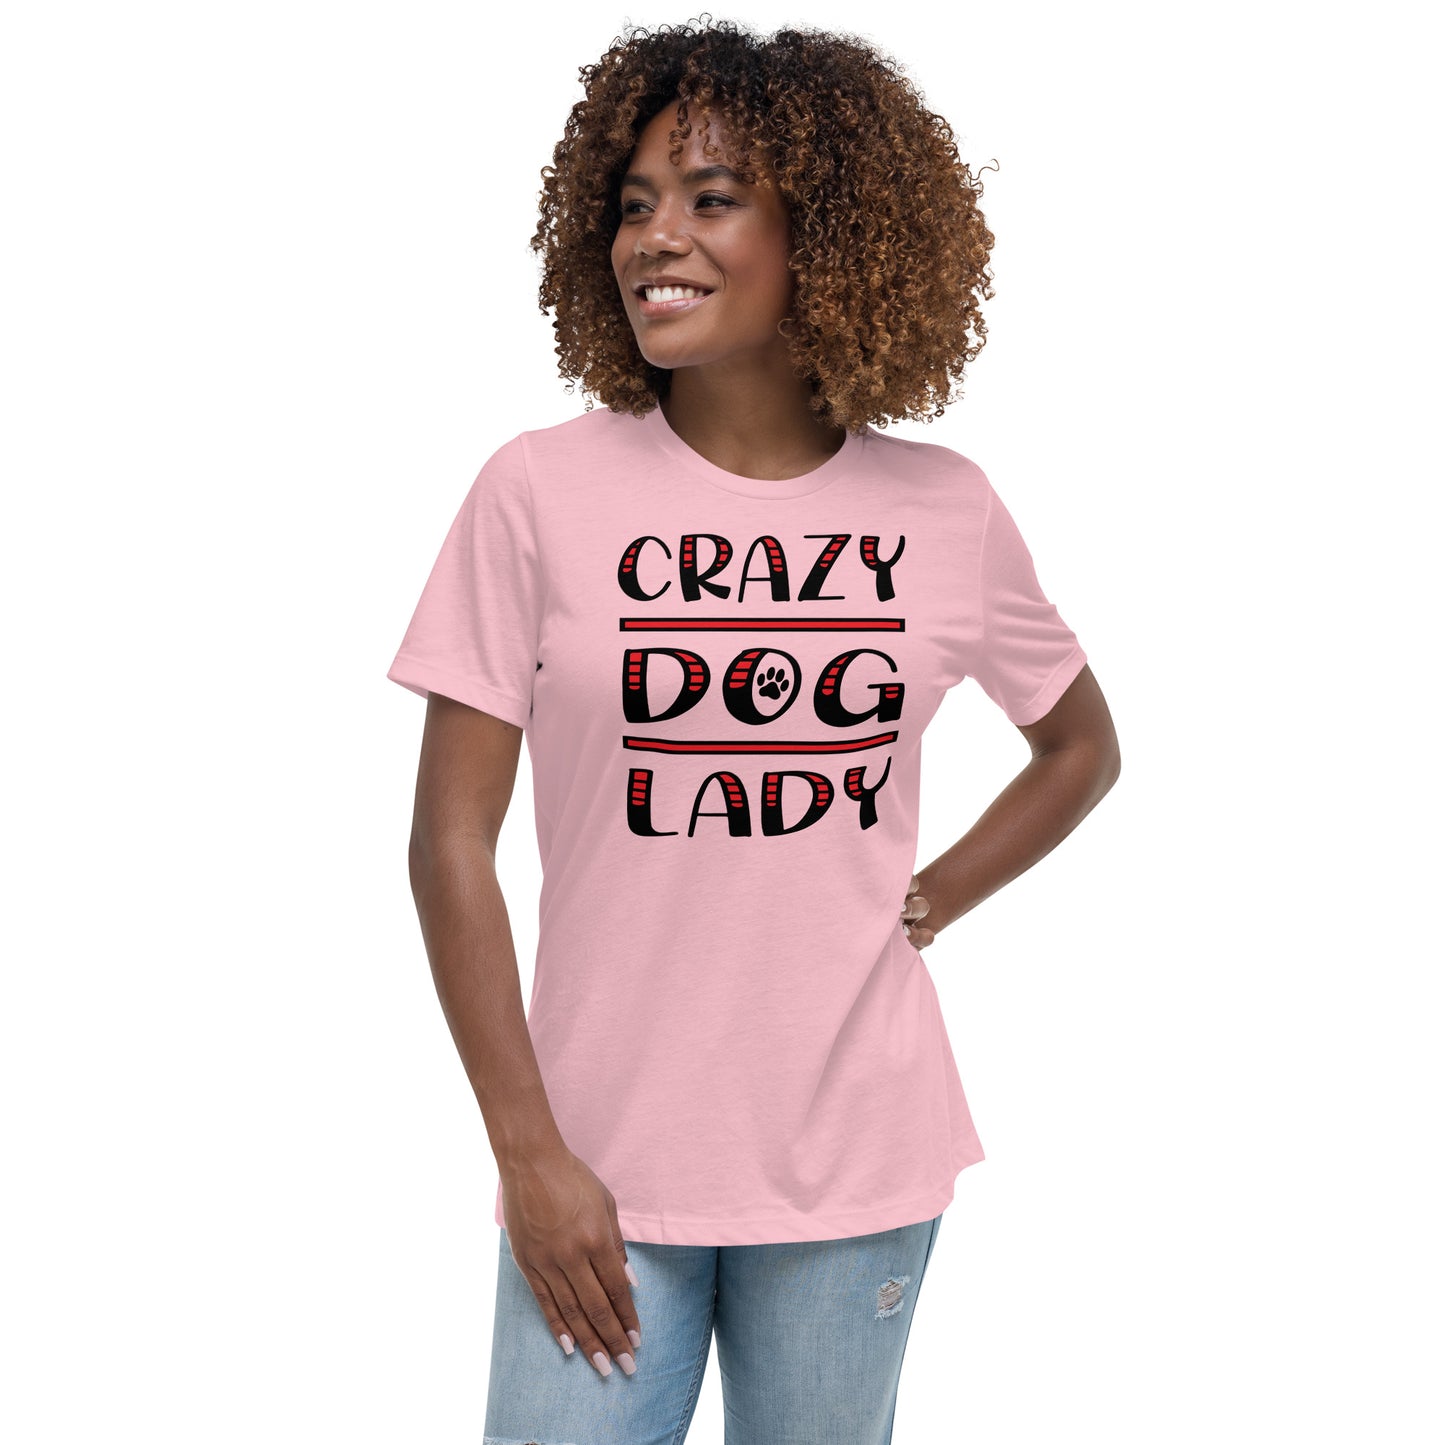 Crazy Dog Lady Women's Pink T-Shirt by Dog Artistry 